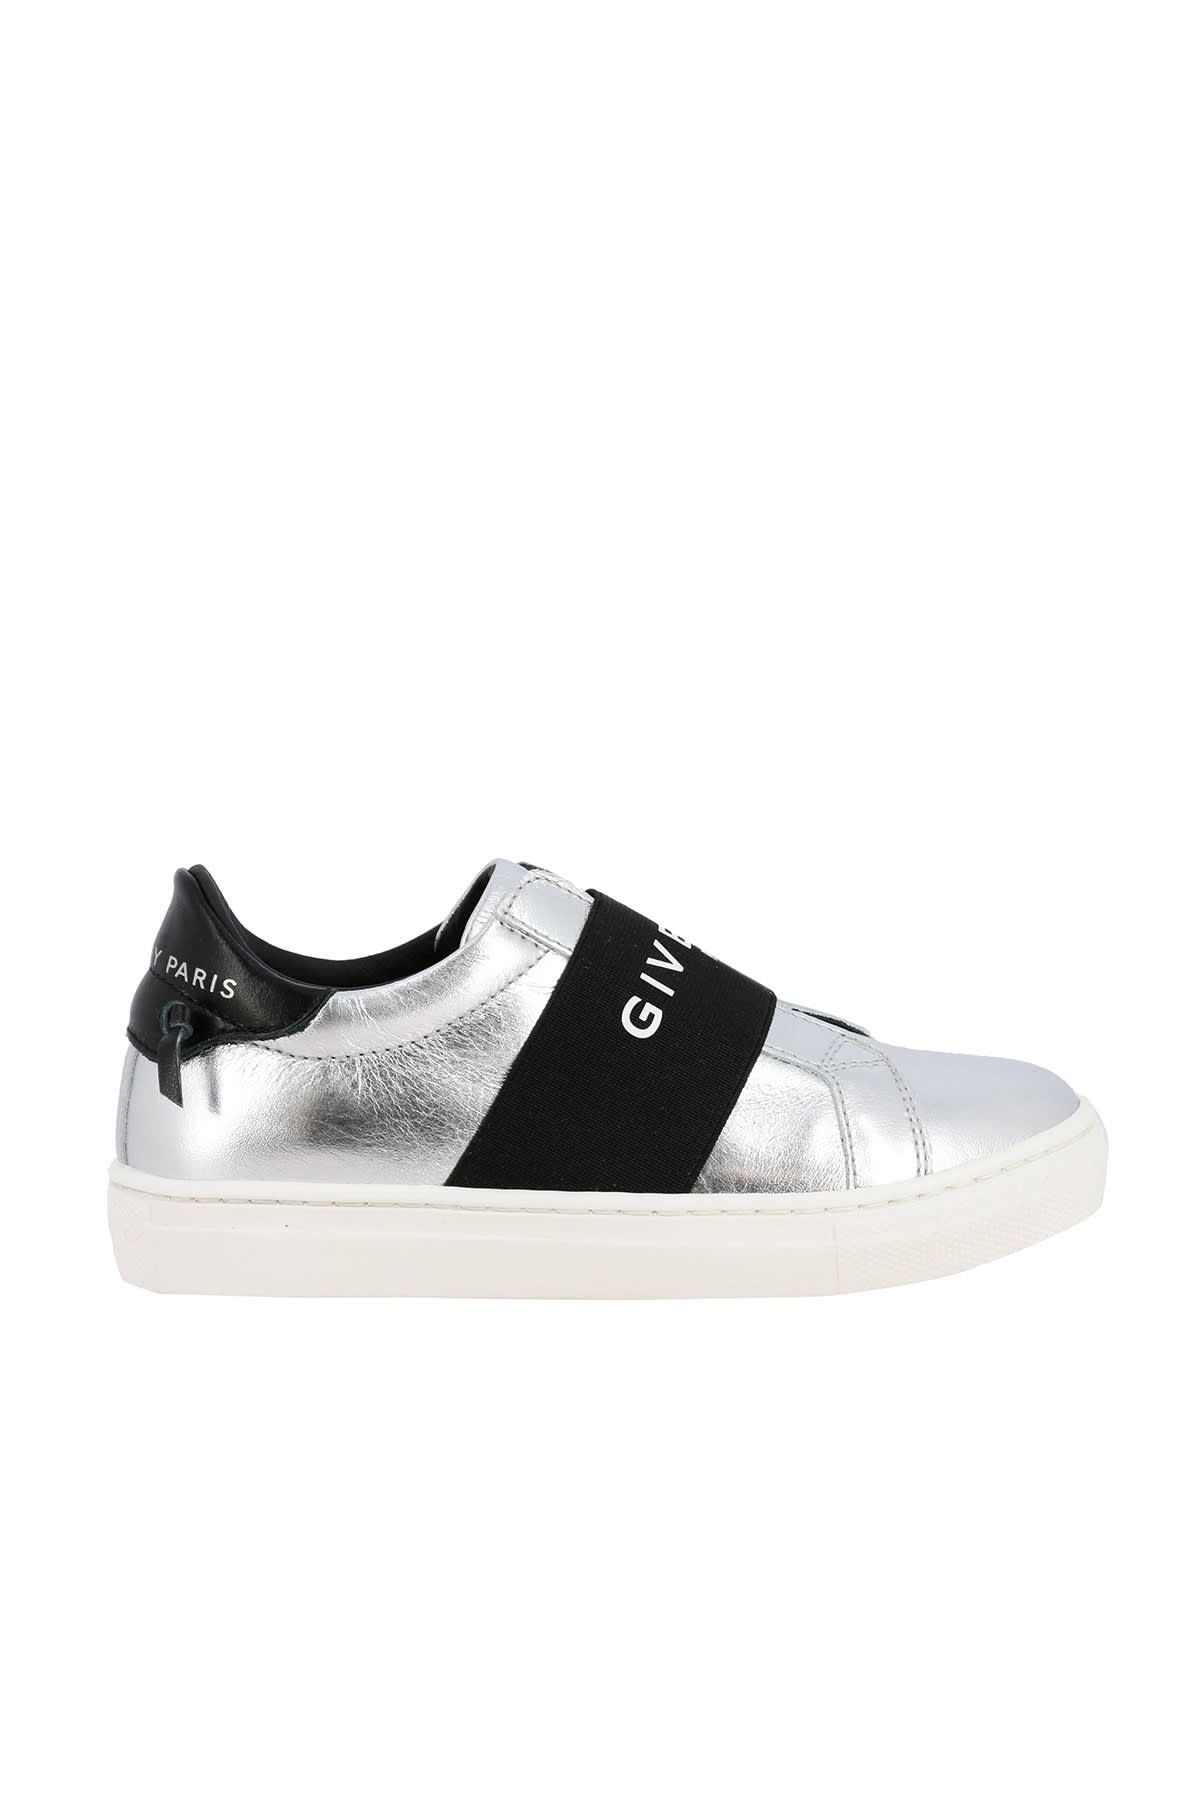 Givenchy Logo-strap Slip-on Sneakers